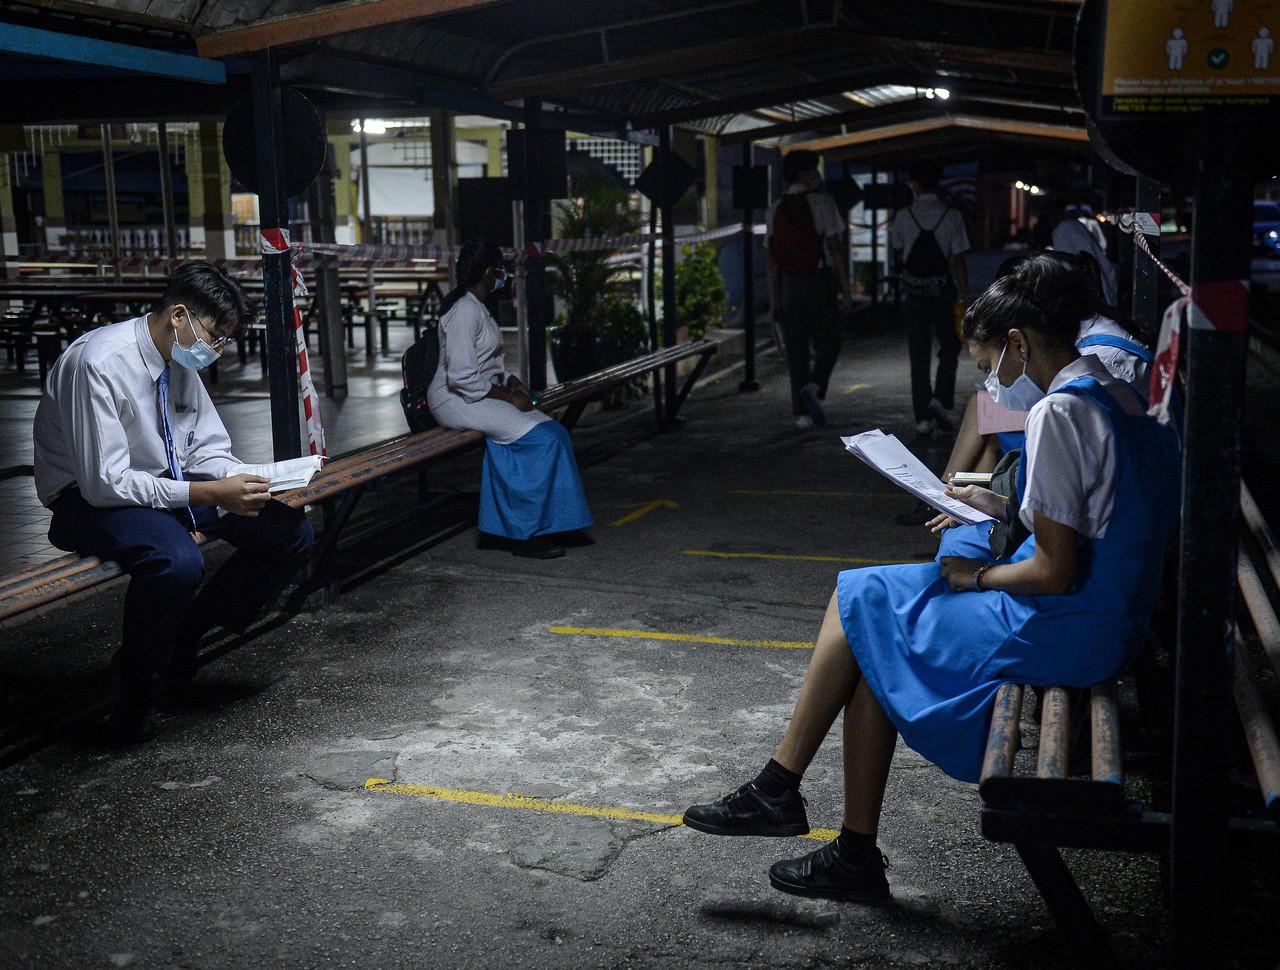 SPM candidates at SMK Subang Jaya complete some last-minute studying before the first exam today. Photo: Bernama